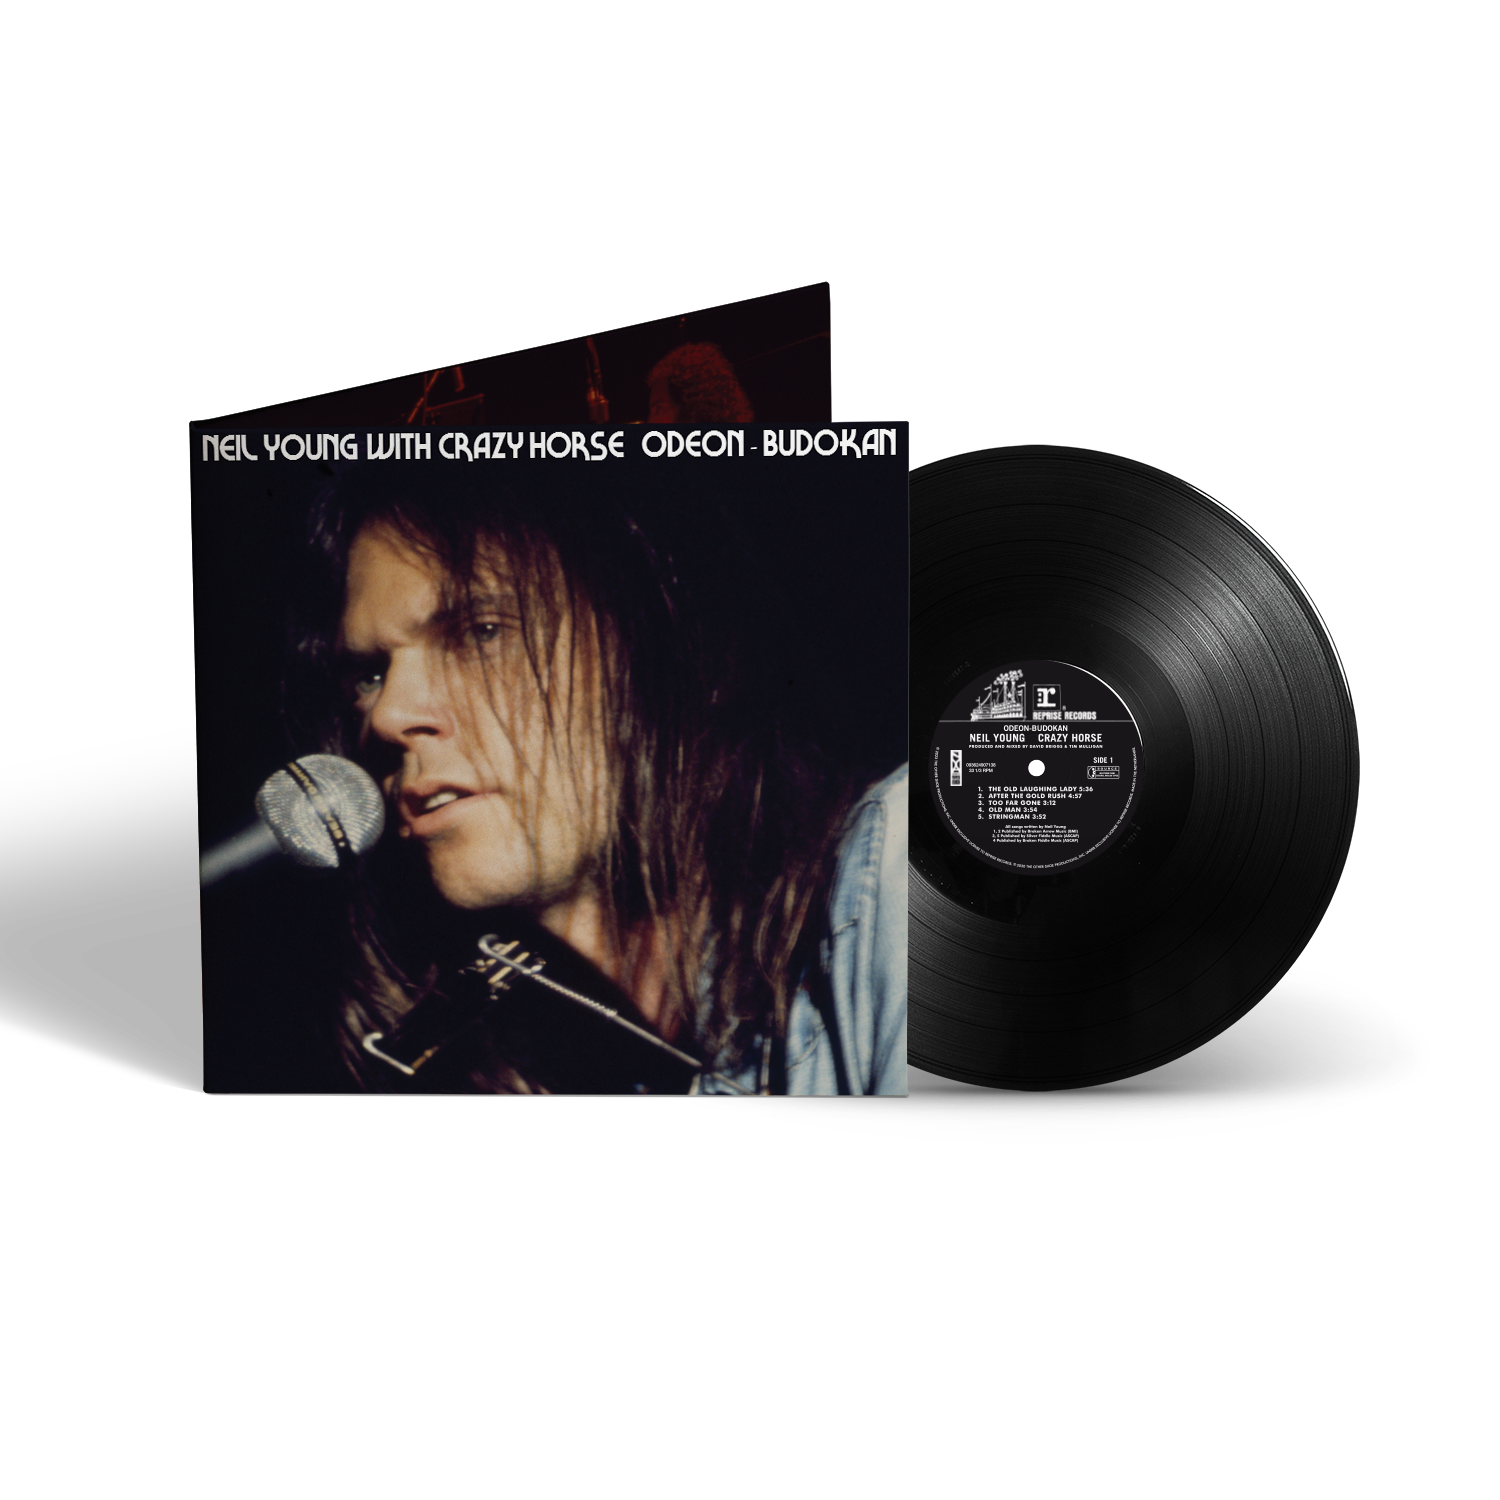 Odeon Budokan LP Neil Young US Official Store